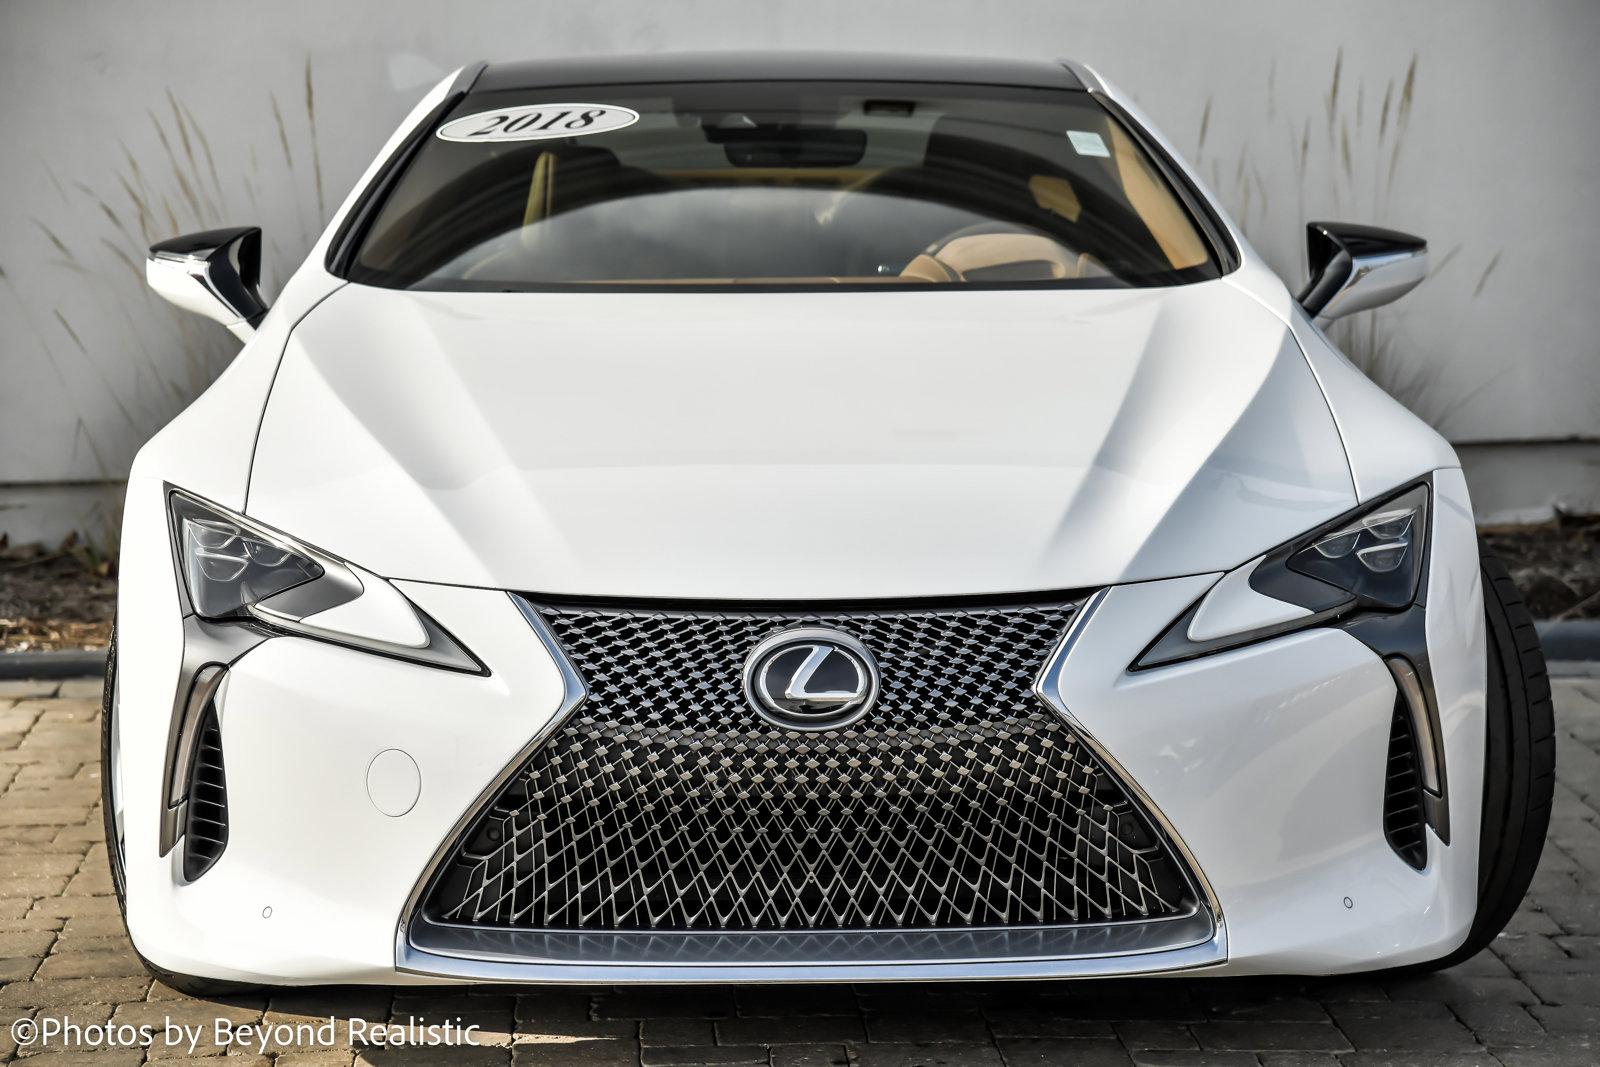 Used 2018 Lexus LC 500 | Downers Grove, IL